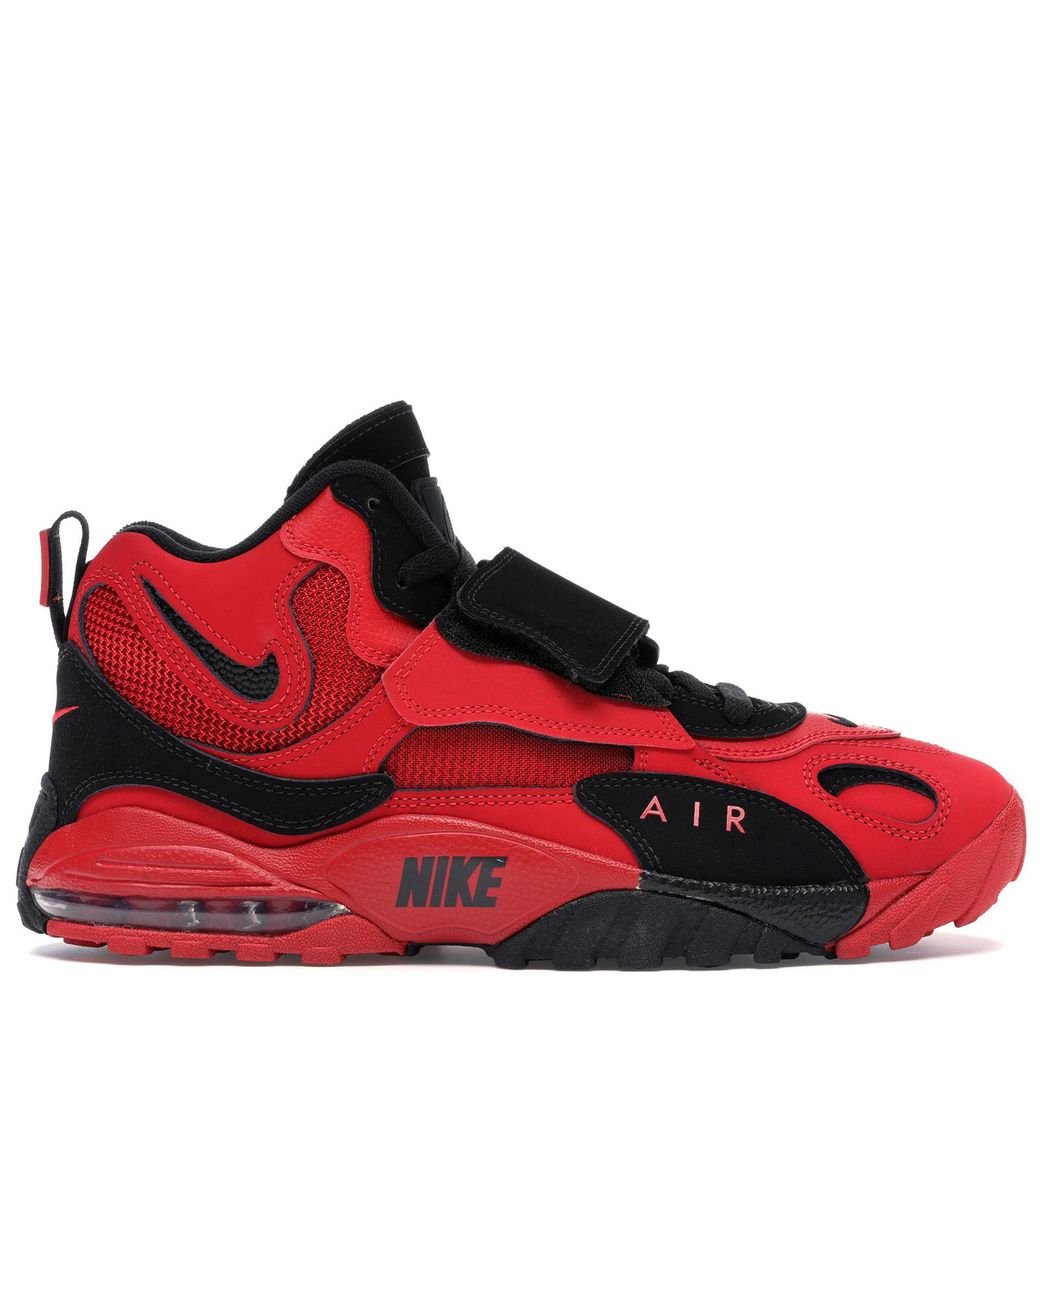 nike air max speed turf black and red 